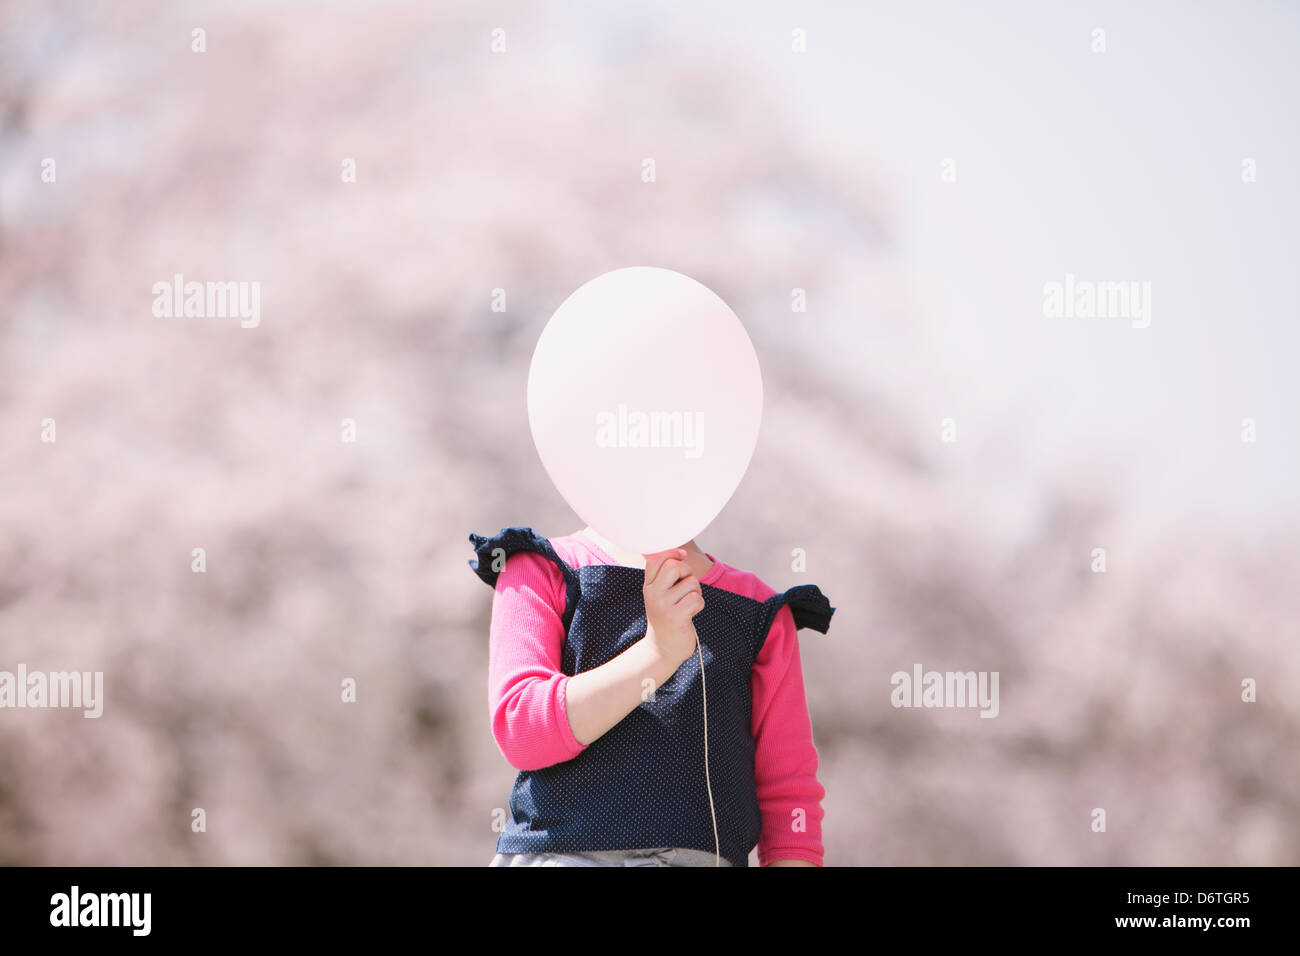 Young girl with balloon and cherry trees in the background Stock Photo